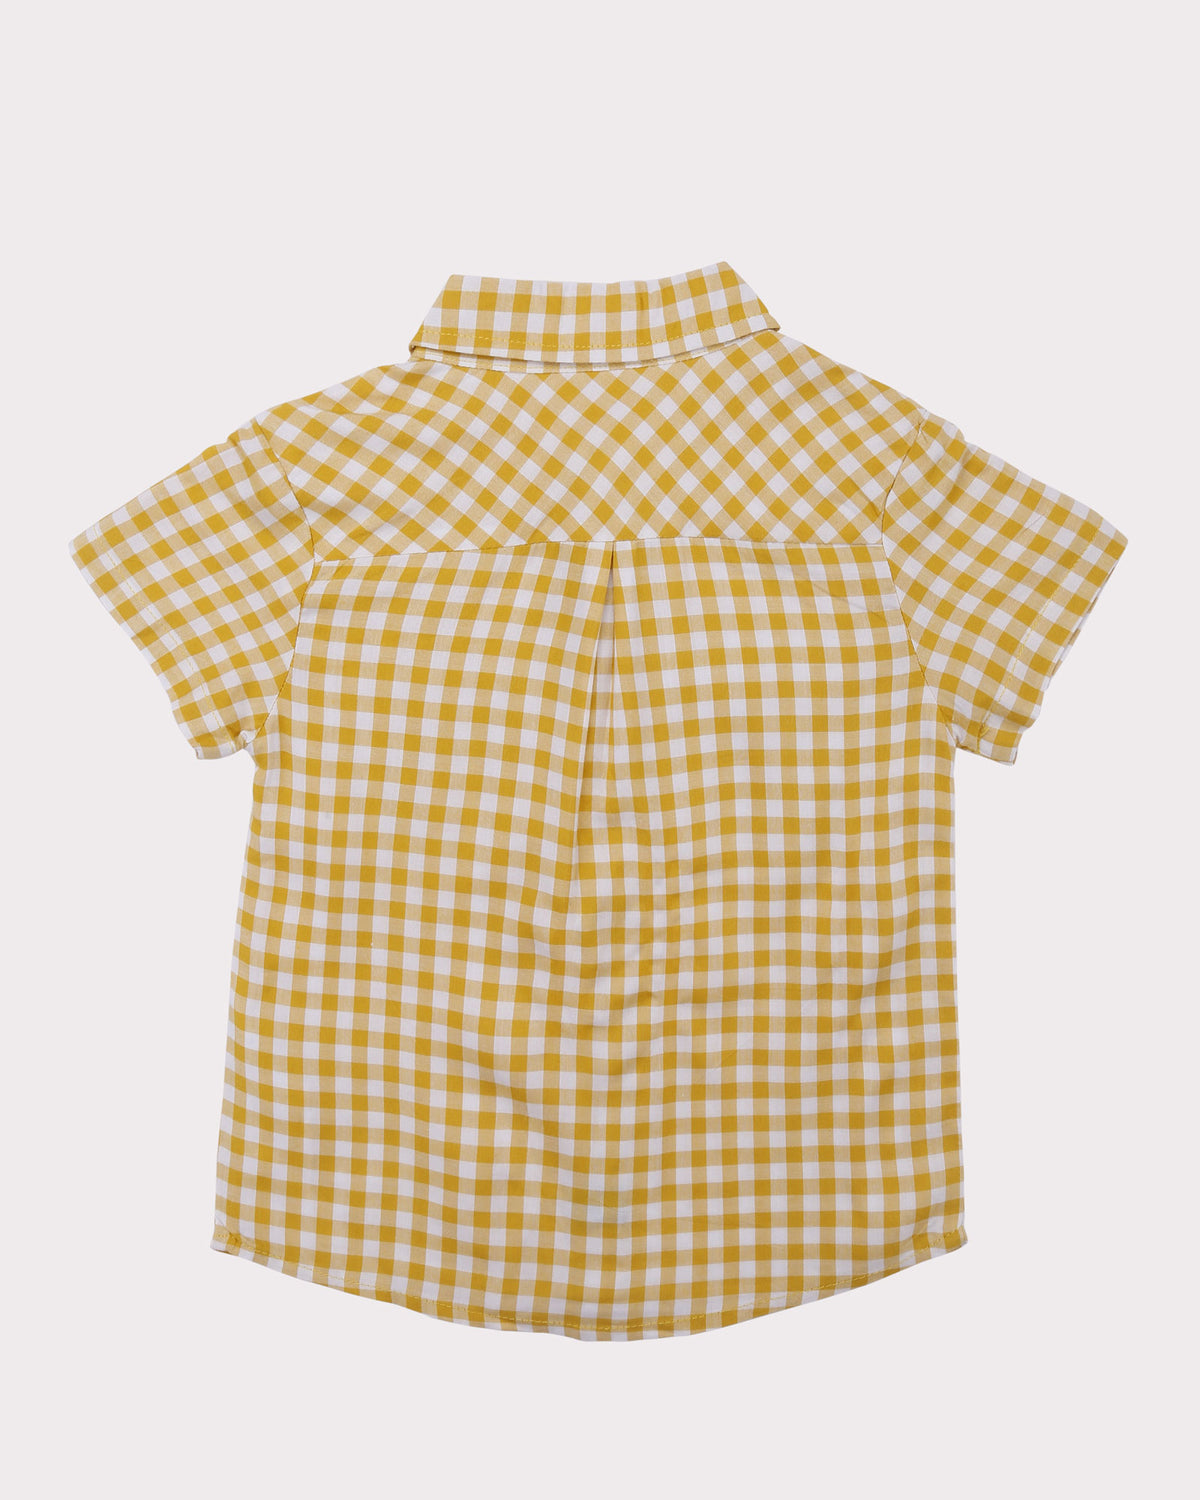 Gingham Shirt in Yellow back